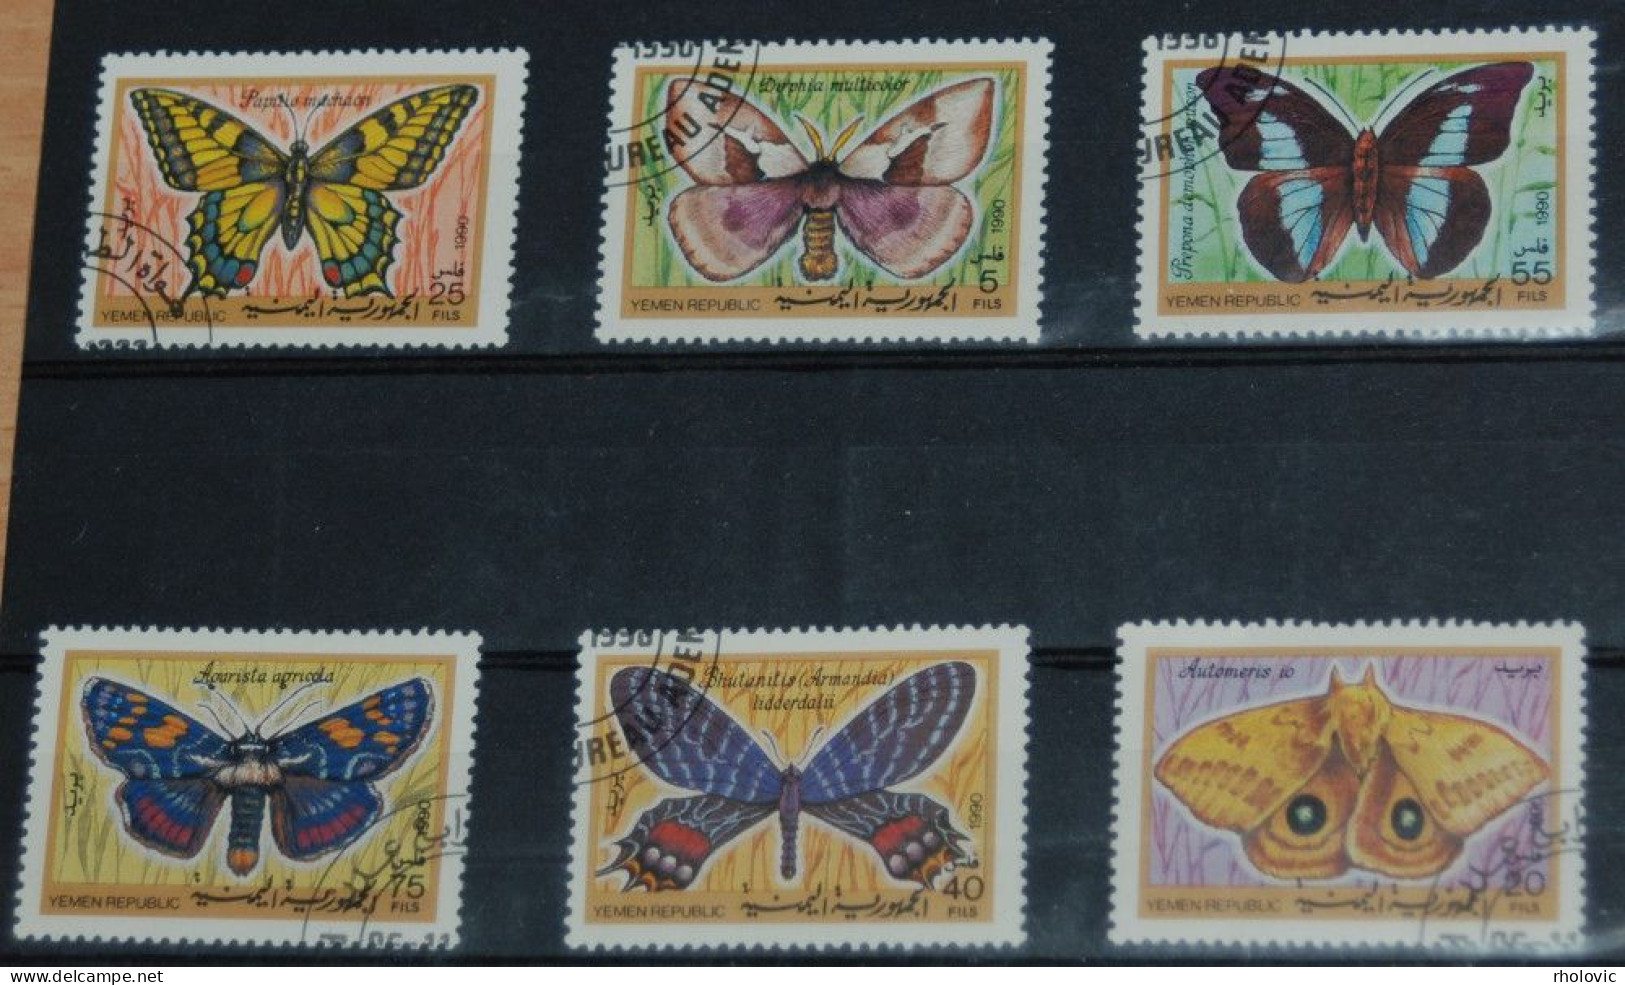 YEMEN REPUBLIC 1990, Butterflies, Insects, Fauna, Mi #15-20, Used - Papillons